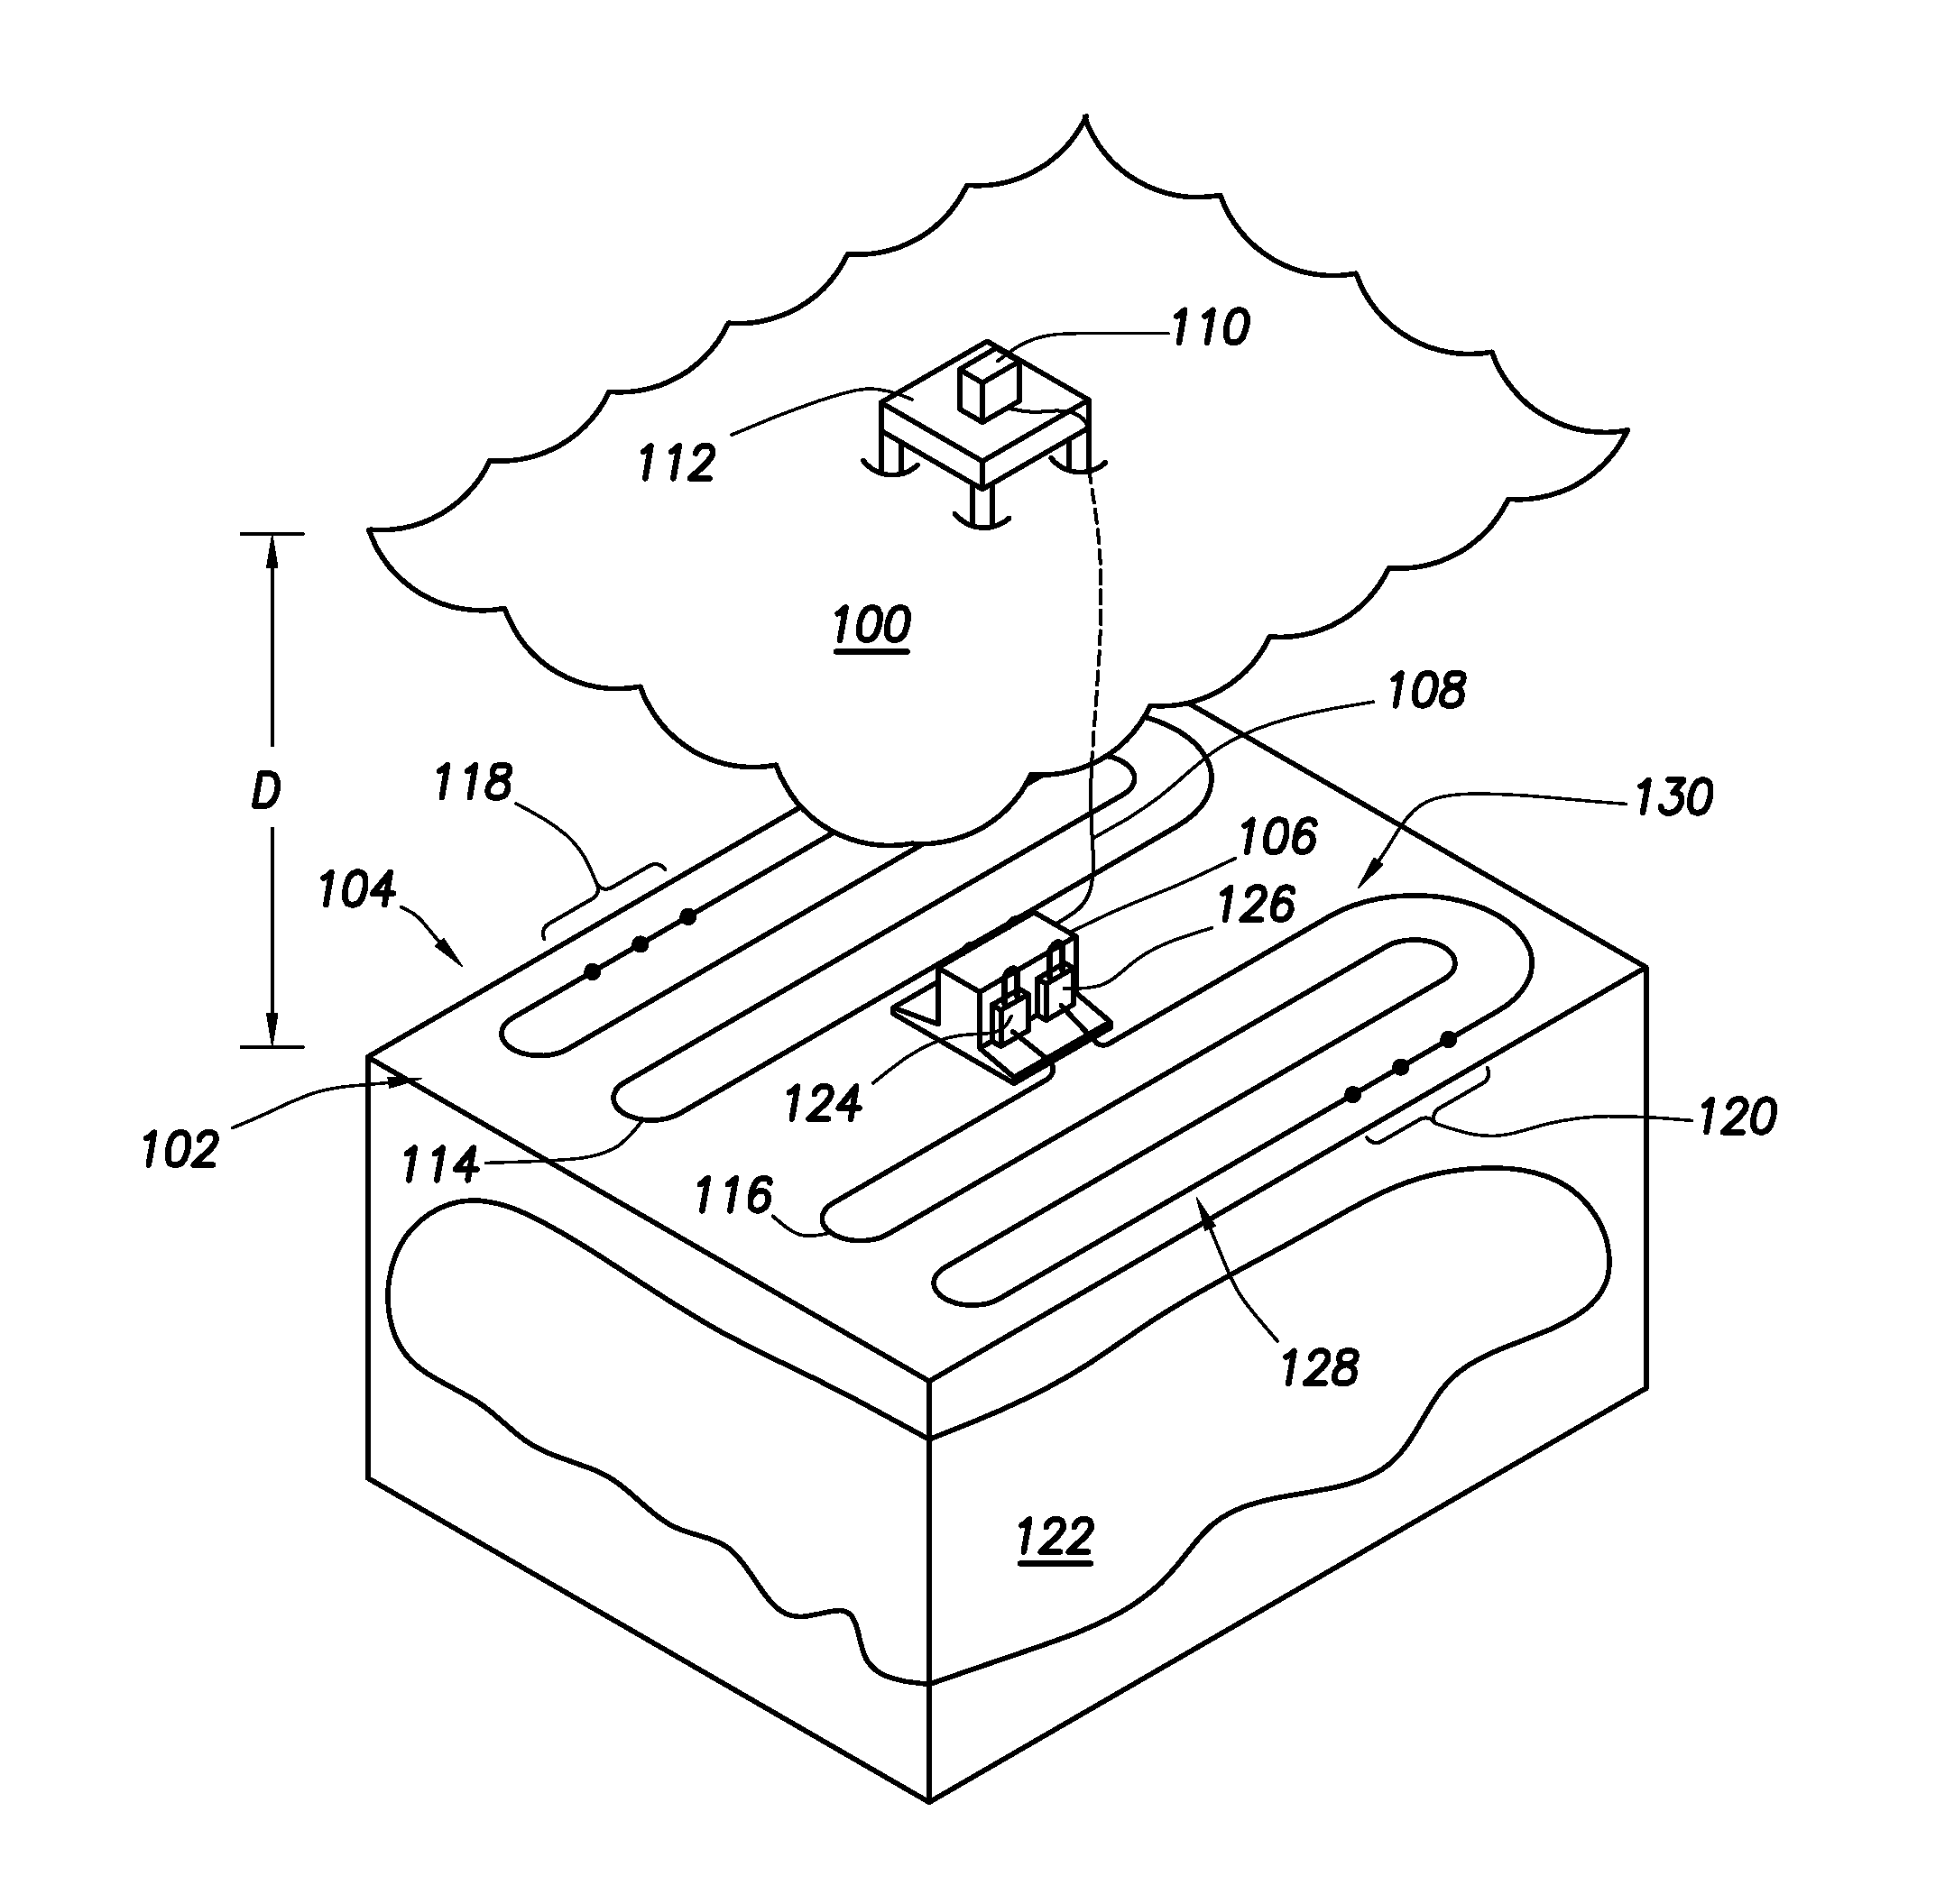 System and method of a reservoir monitoring system